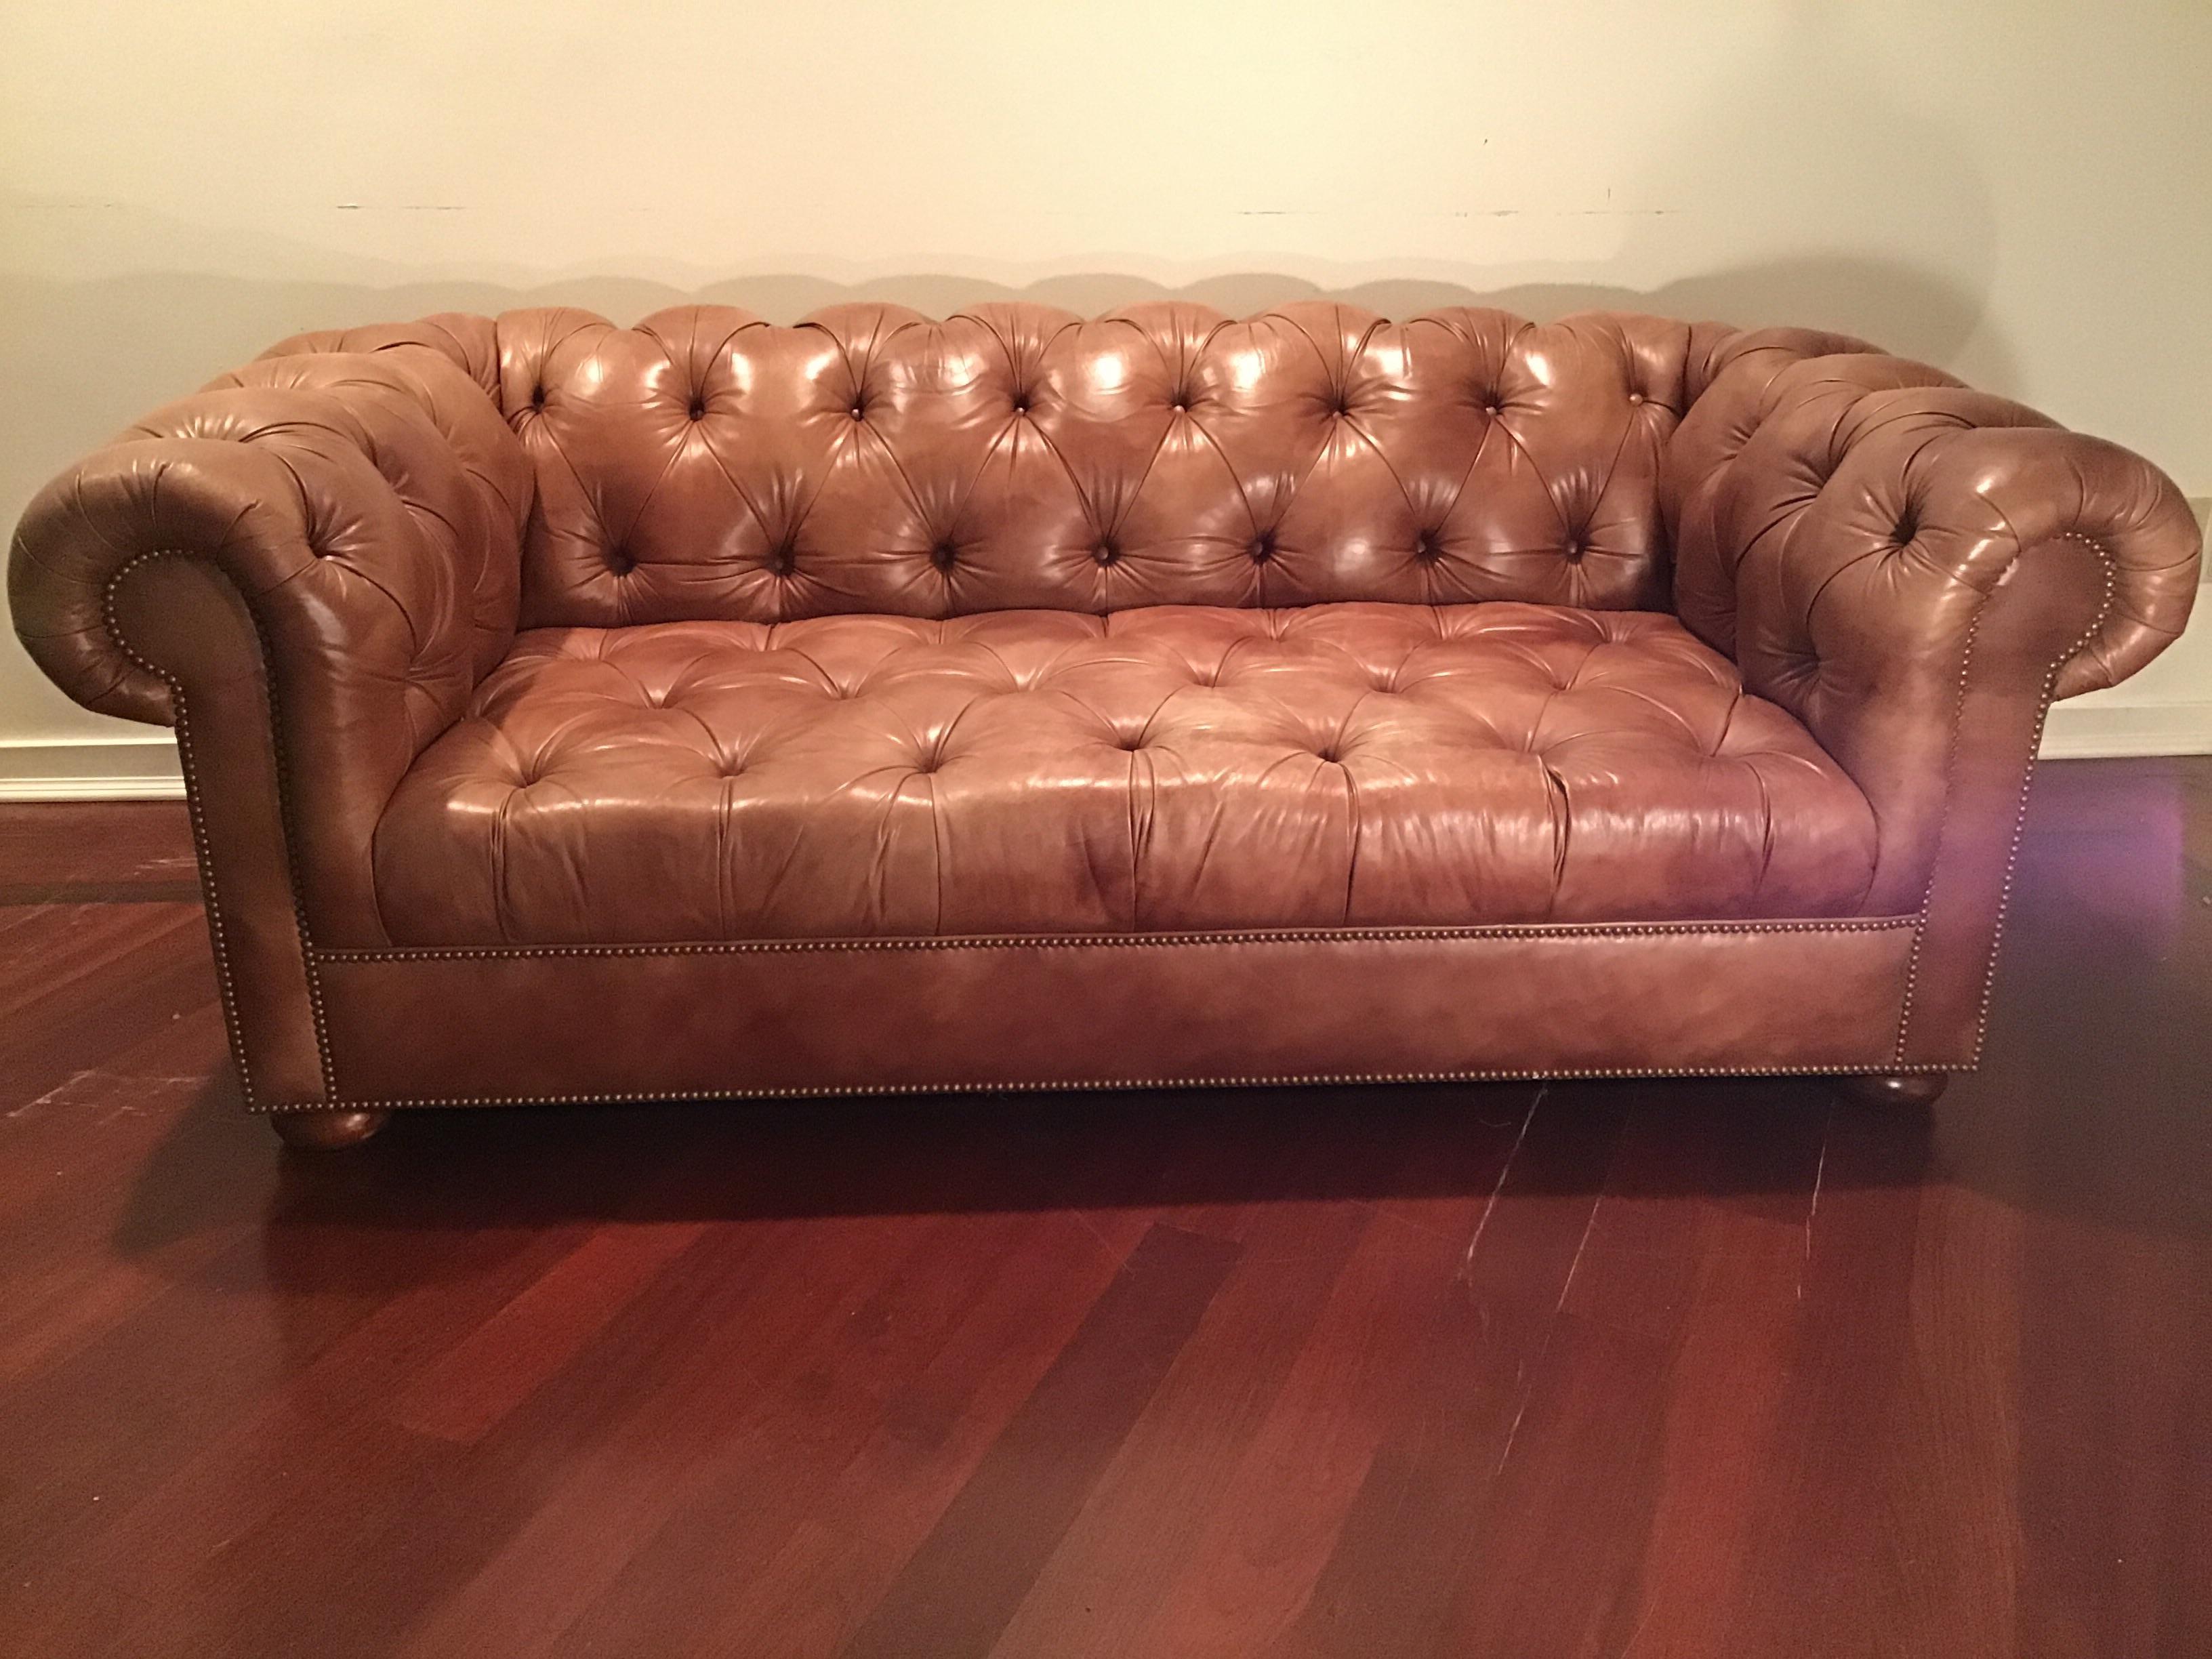 High quality, very heavy, leather Chesterfield sofa on wooden feet. Very deep.
Saddle color. From a Southampton, NY estate.